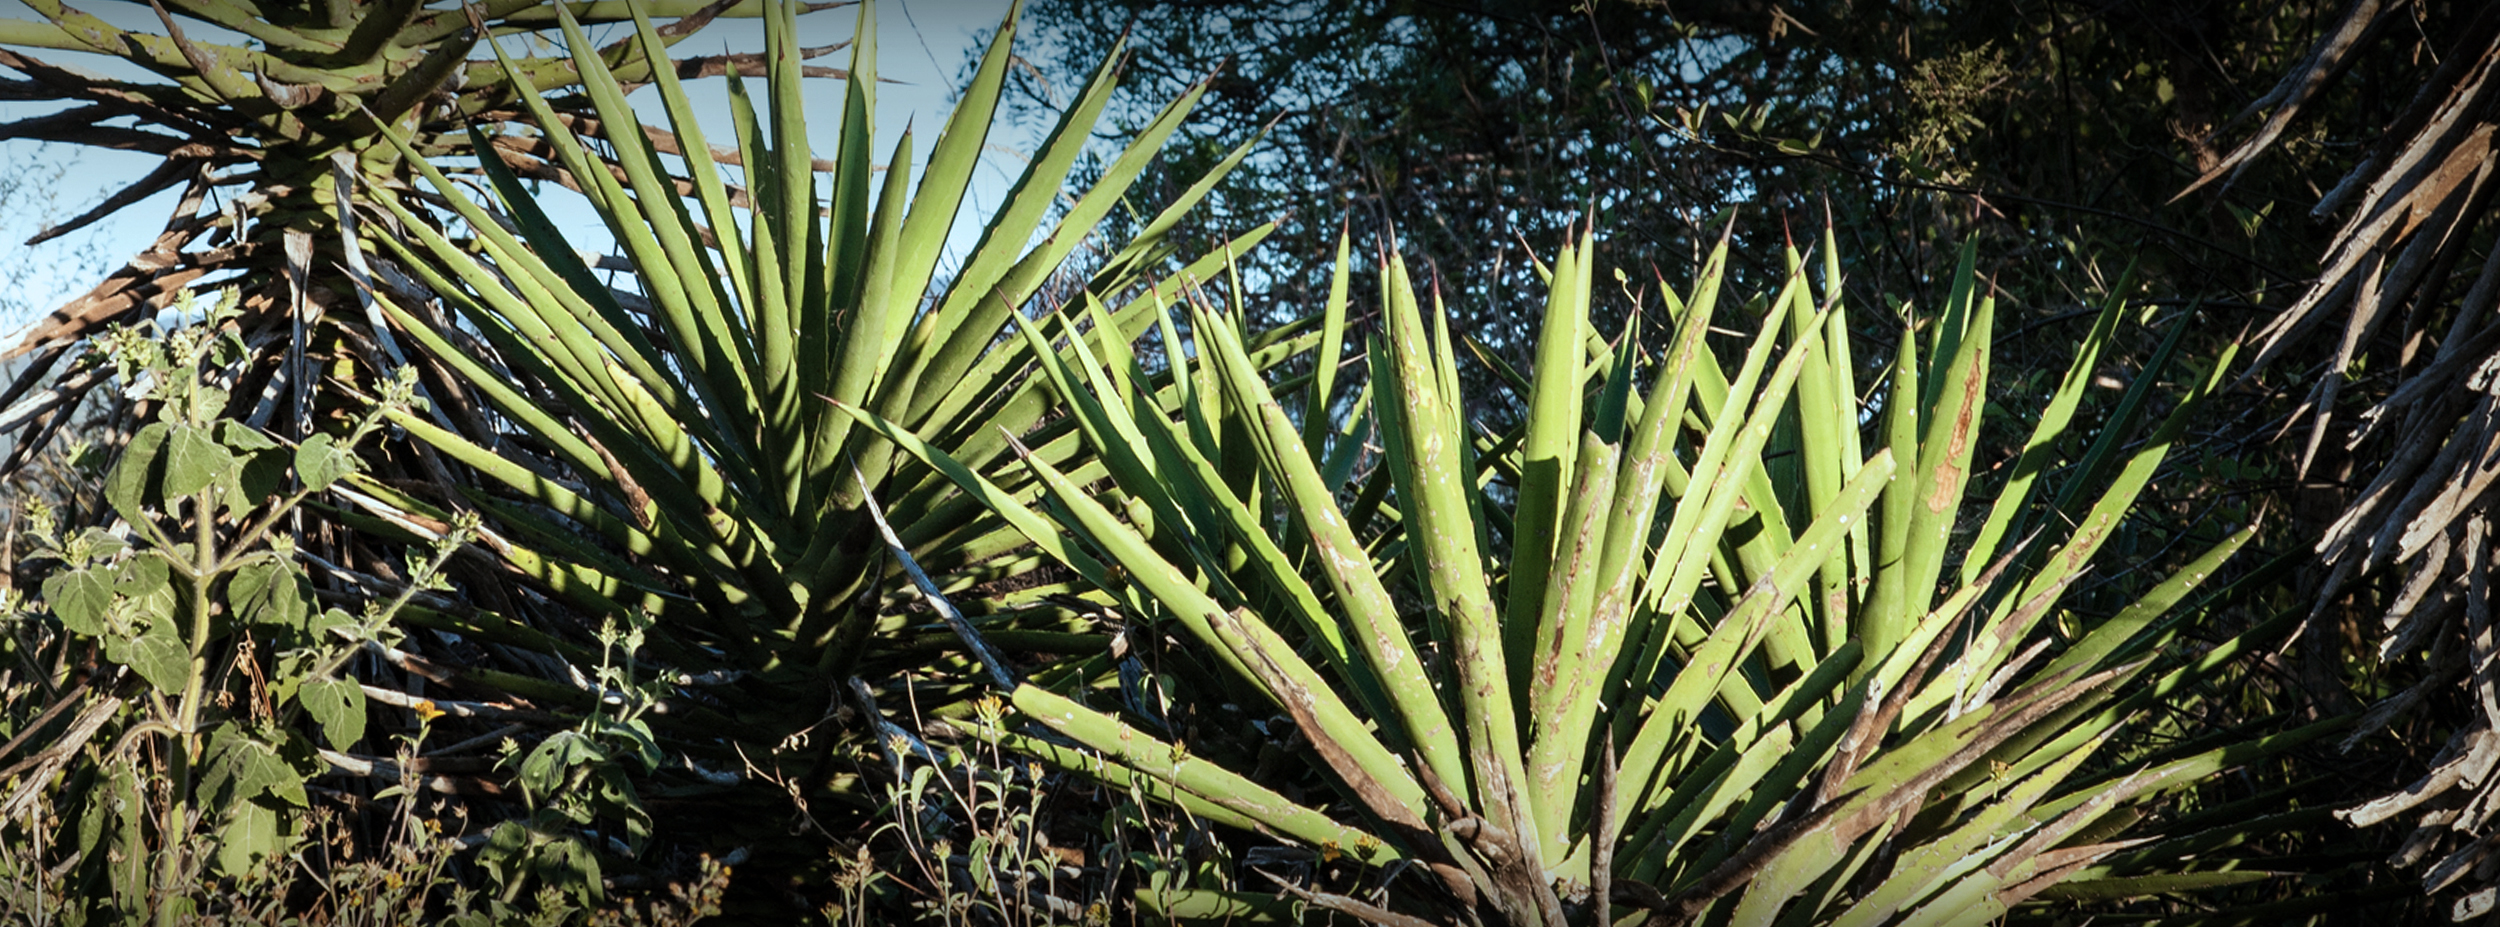 Maguey Cuishe